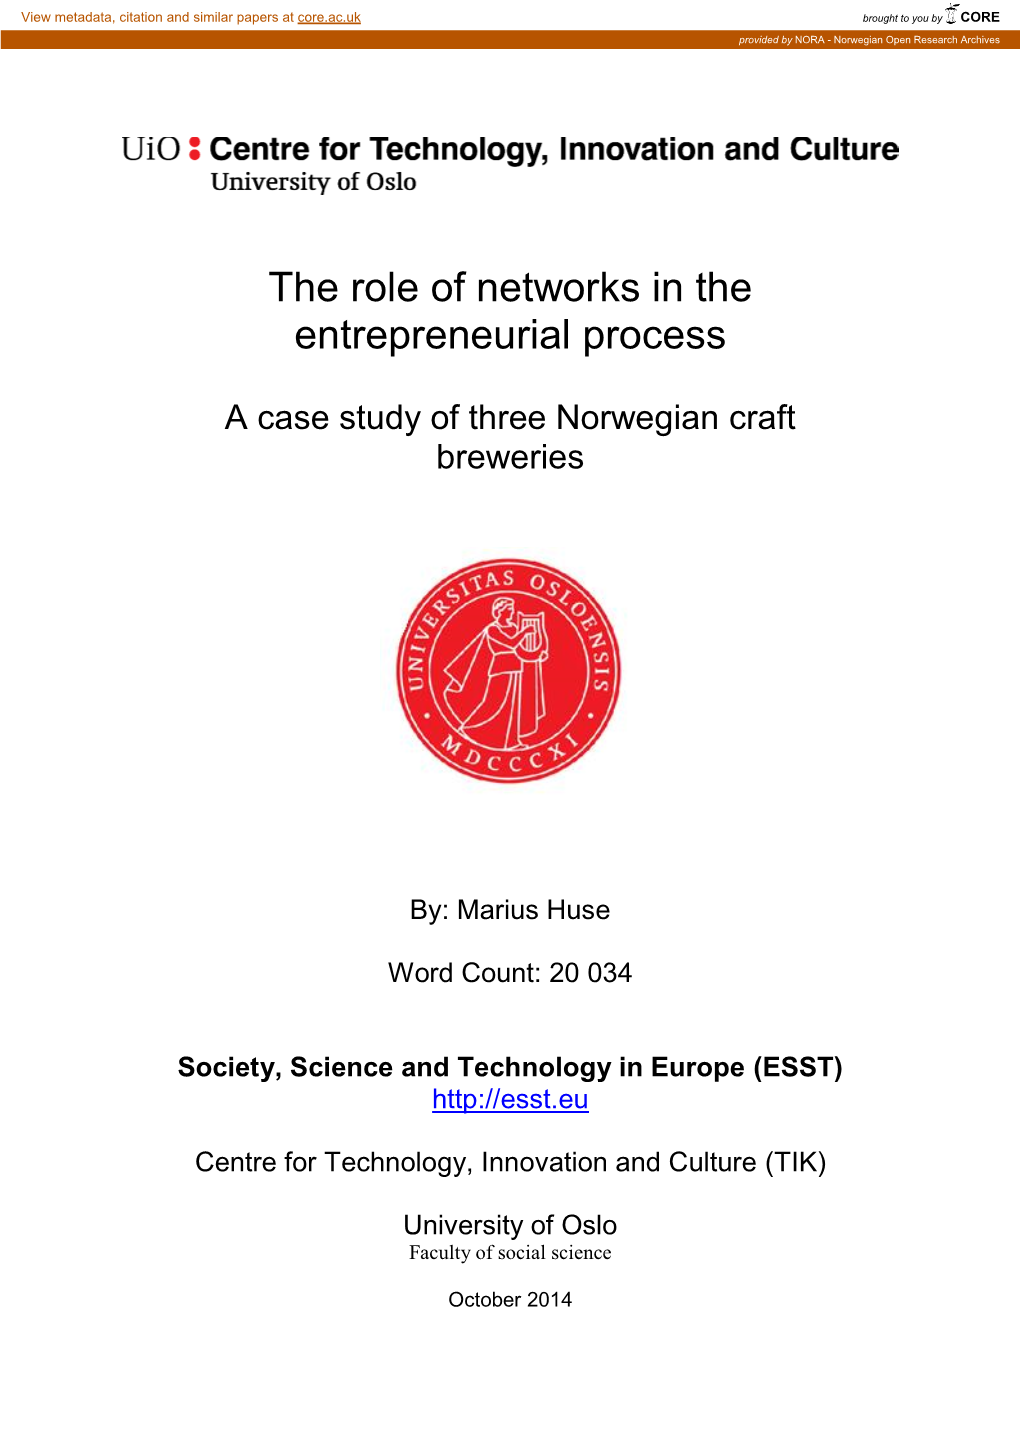 The Role of Networks in the Entrepreneurial Process